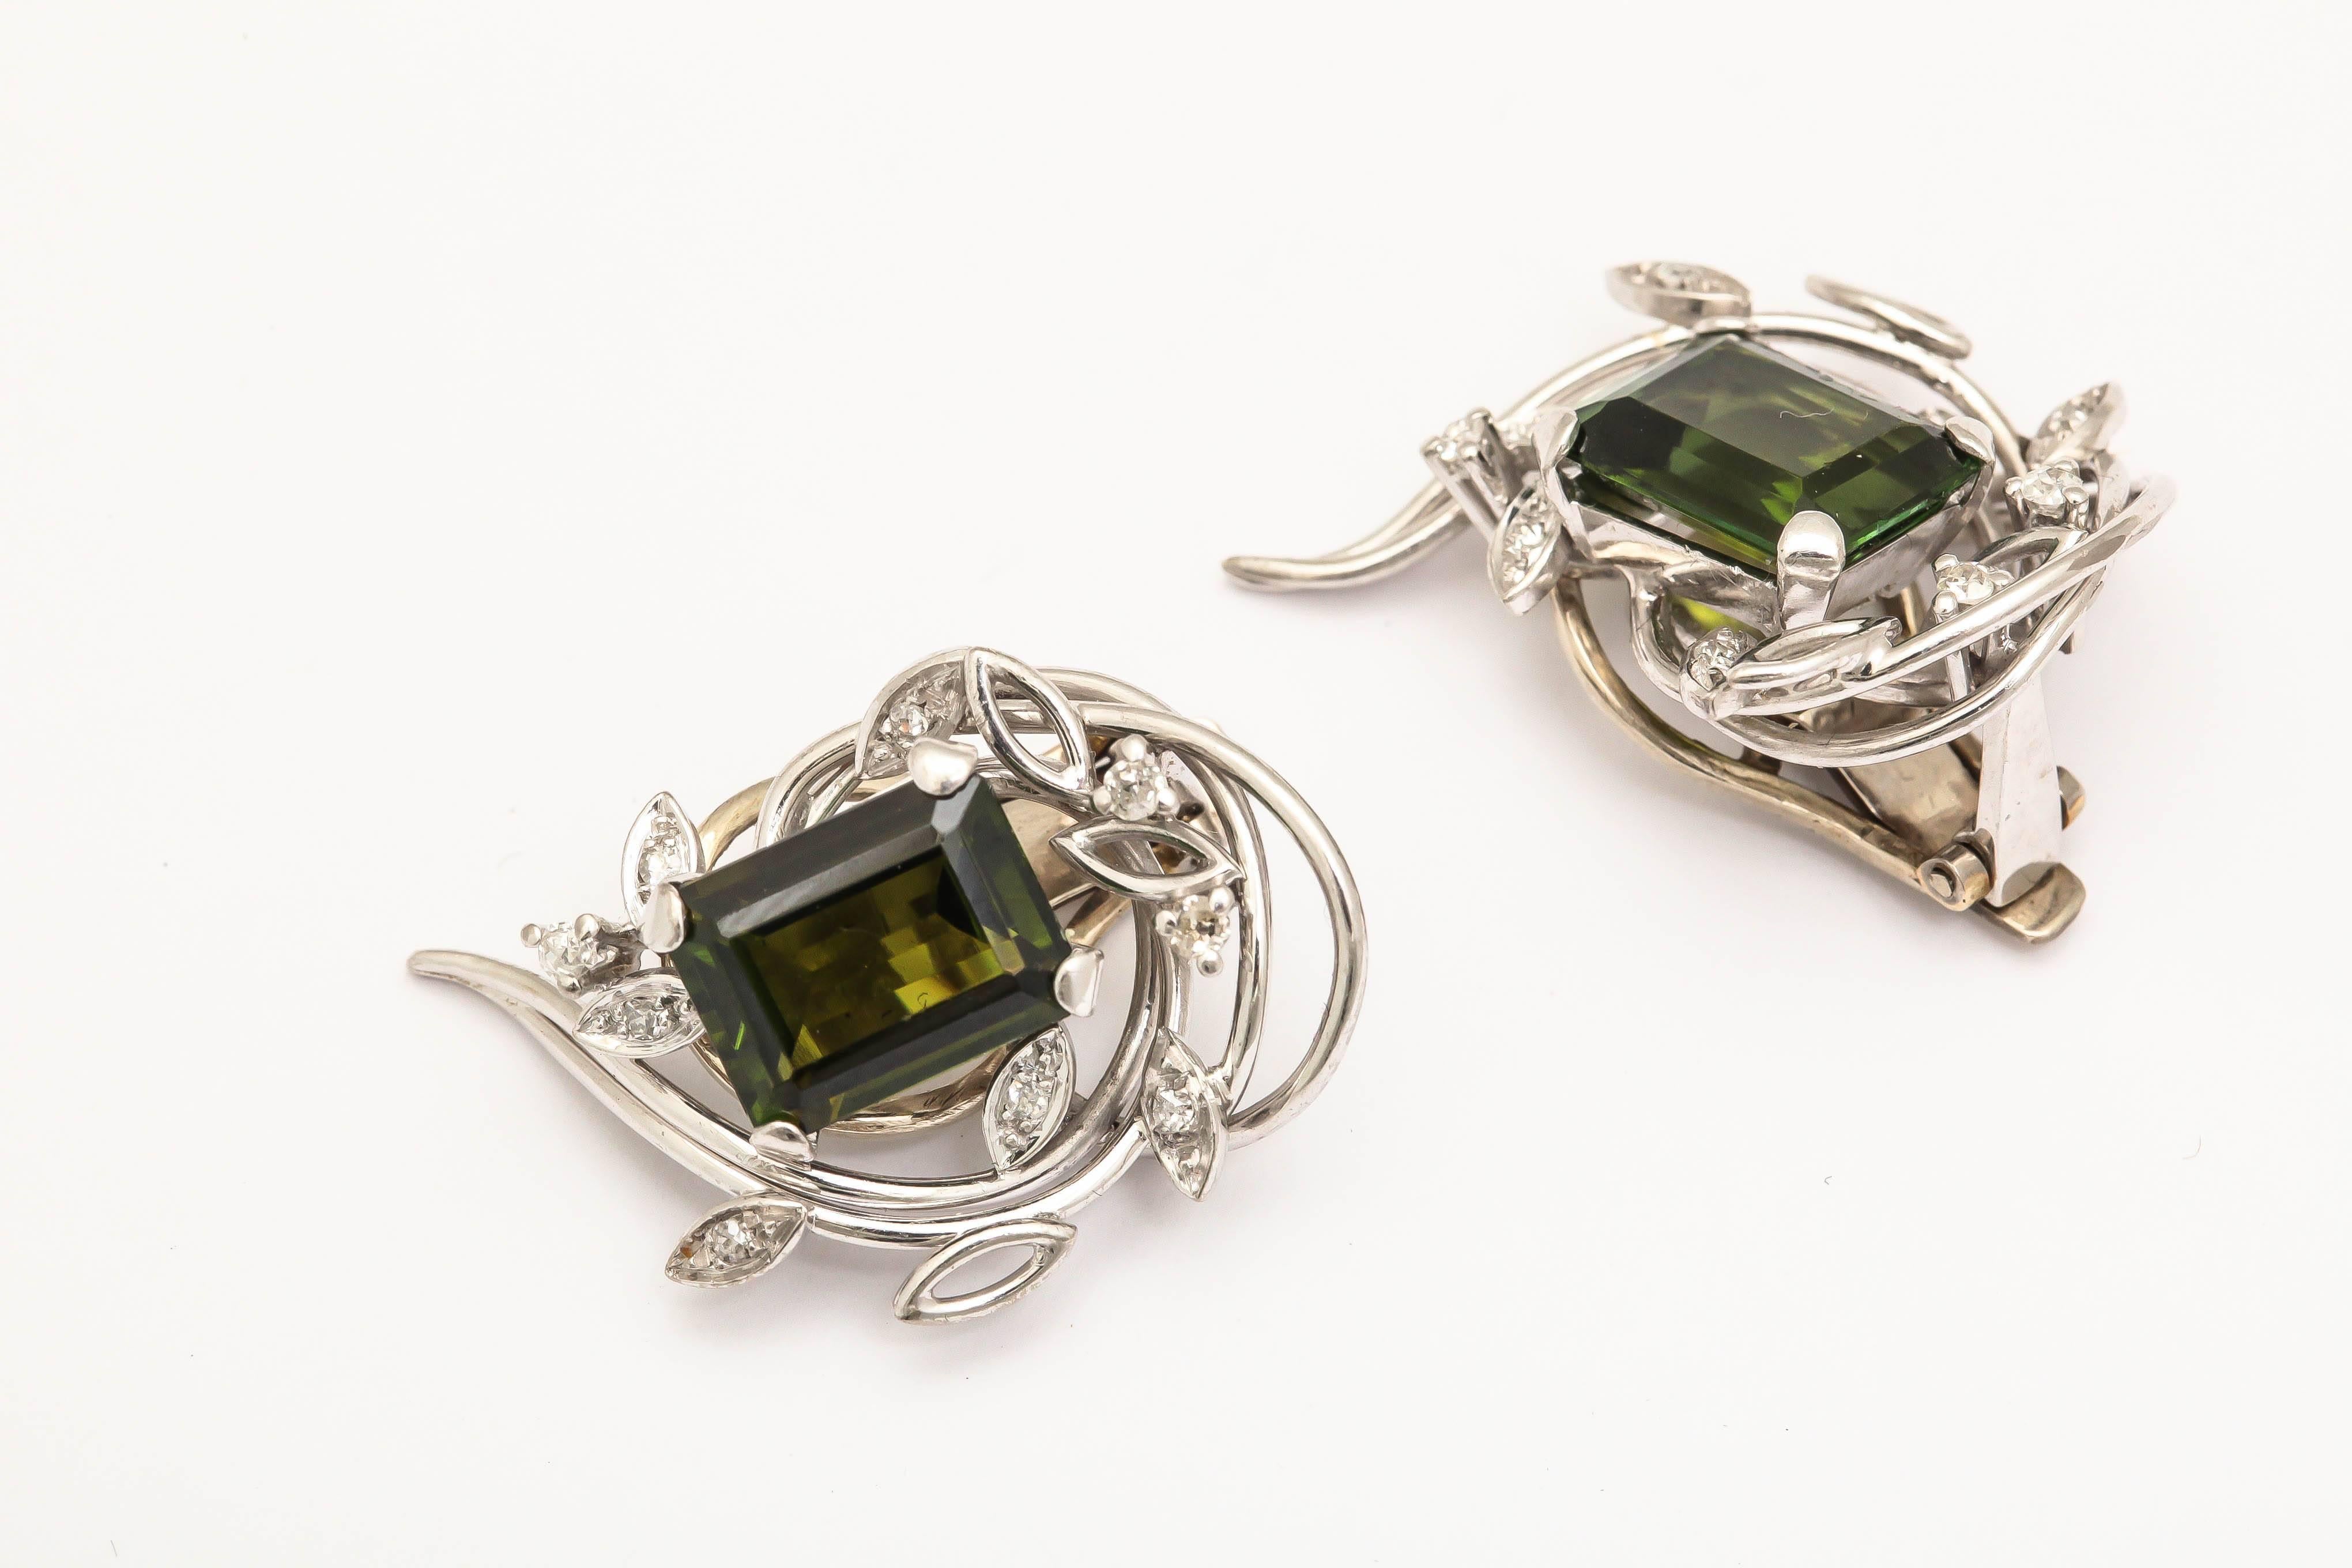 Emerald Cut Green Tourmaline Diamond Gold Earrings  In Excellent Condition For Sale In New York, NY